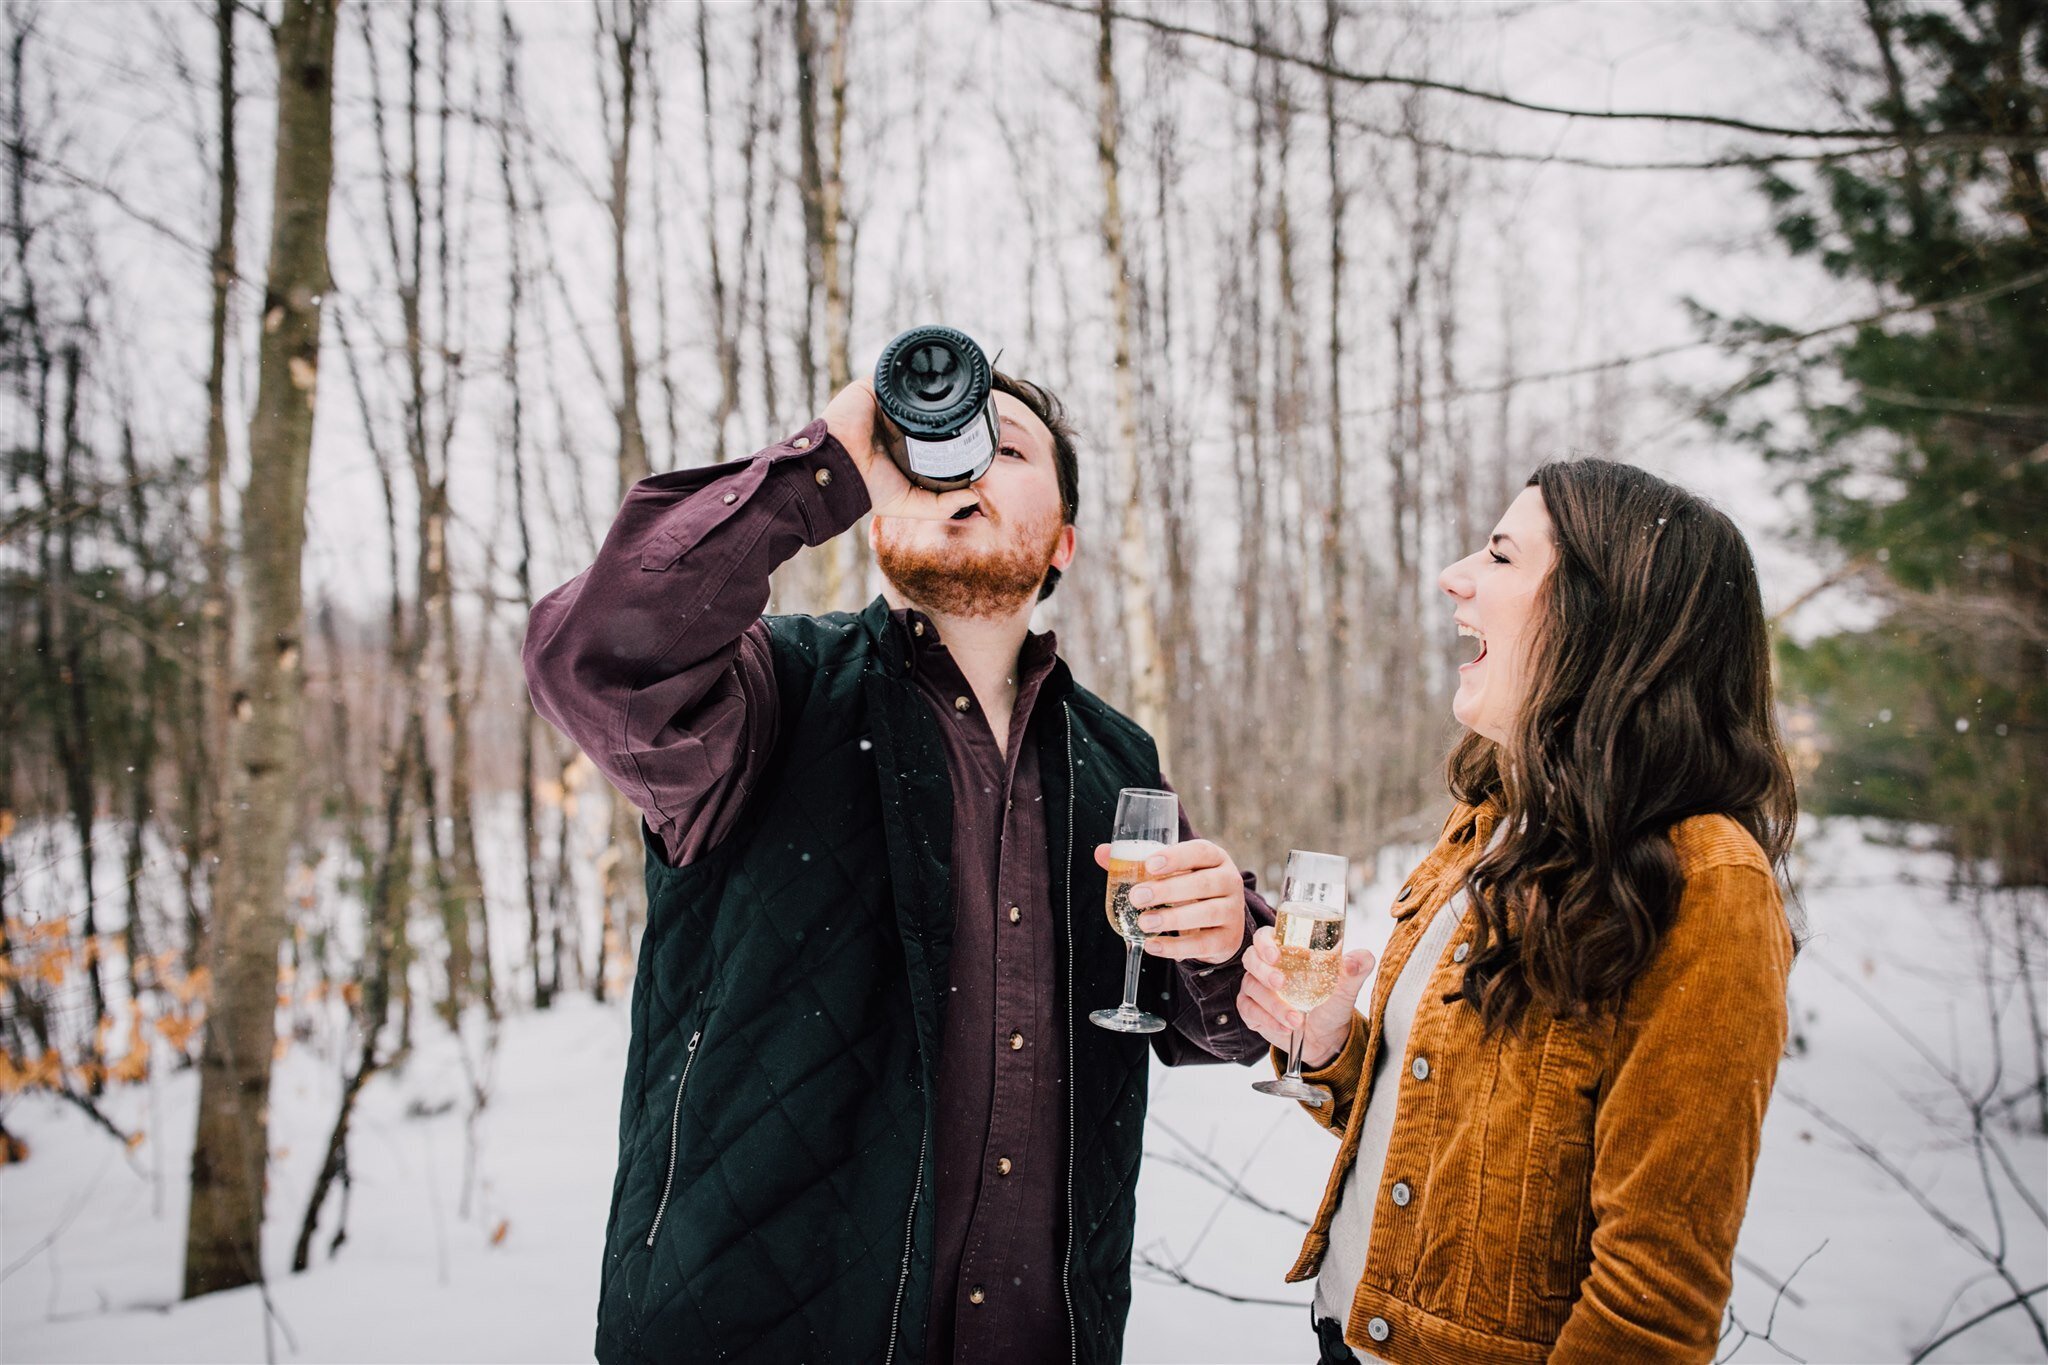 Carlie & Joe's Engagement Photos in Snow — Brittany Juravich Photography